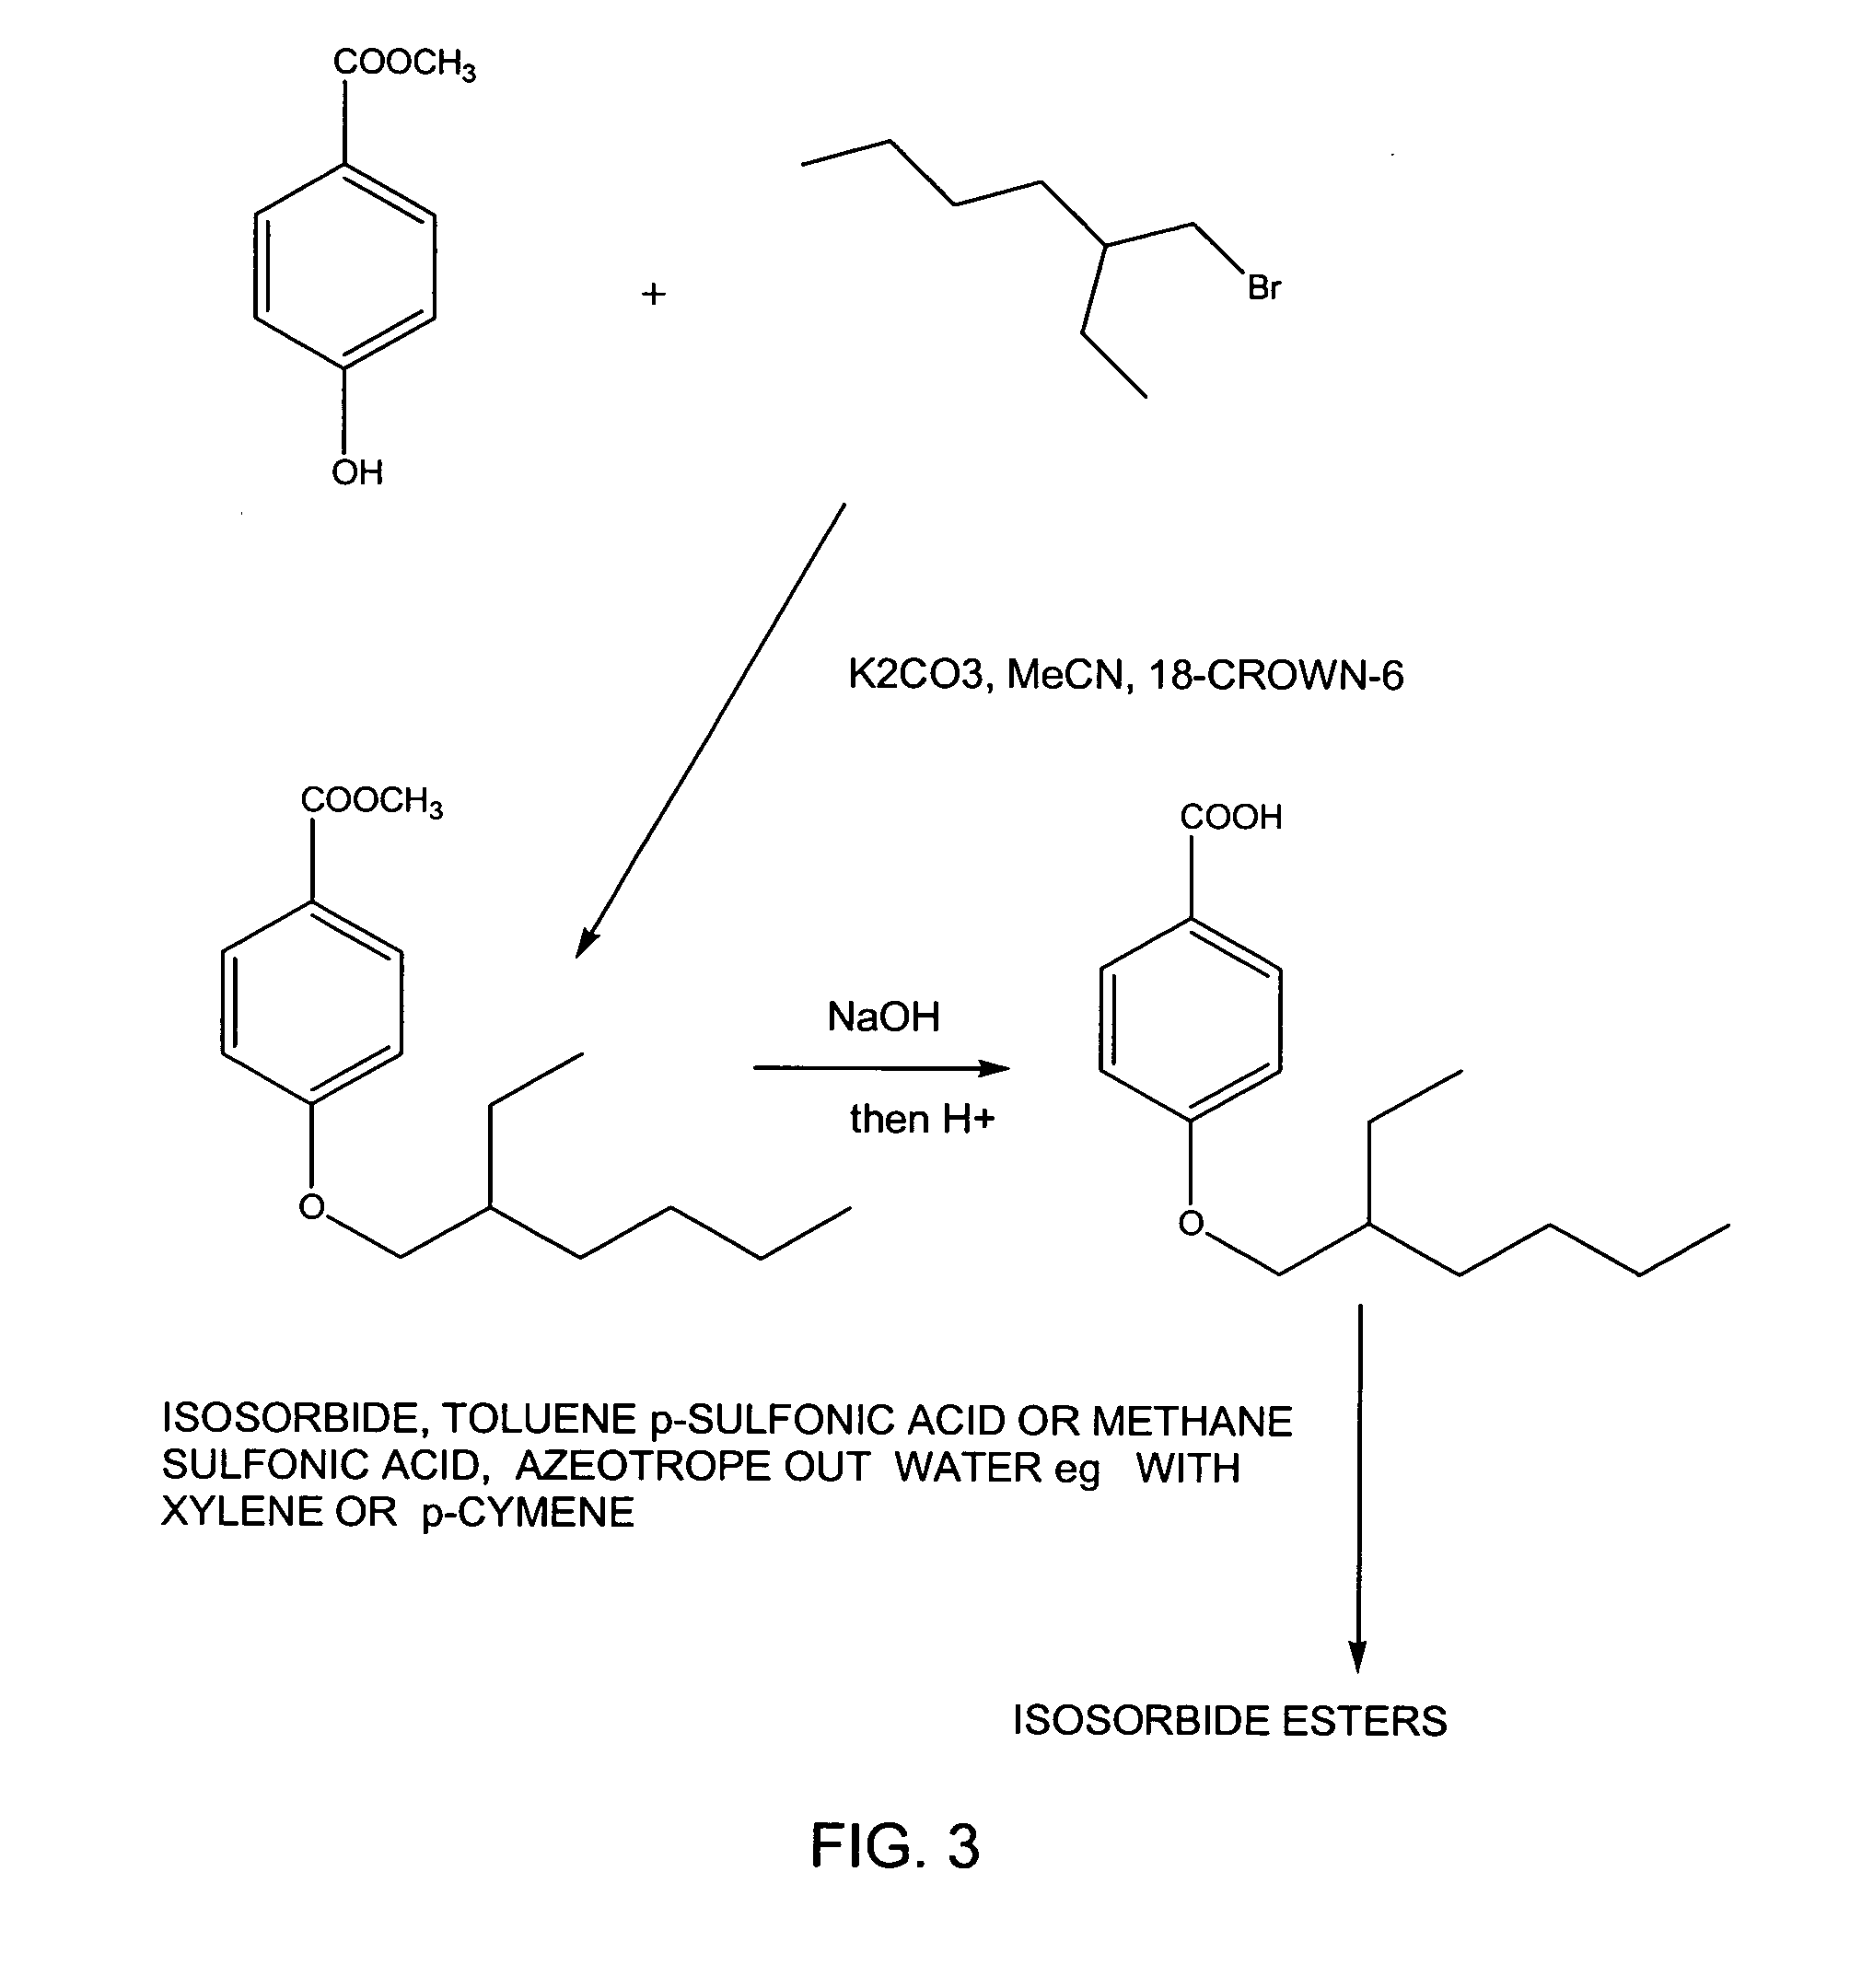 Esters of anhydrosugar alcohols as plasticizers